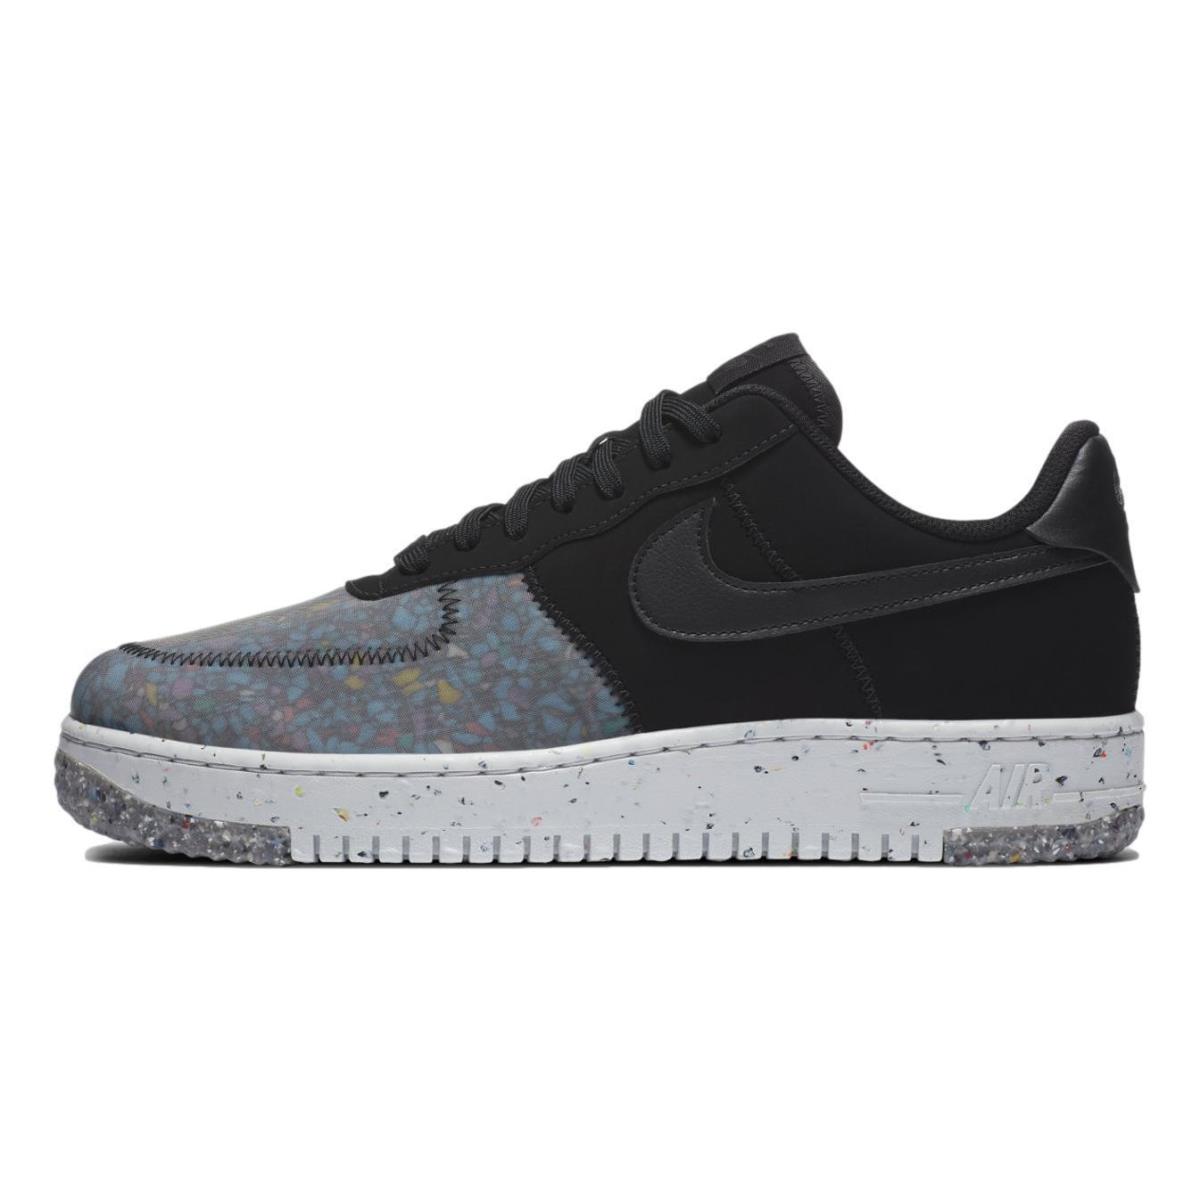 Nike shoes Air Force Crater - Black/Black-Photon Dust 0